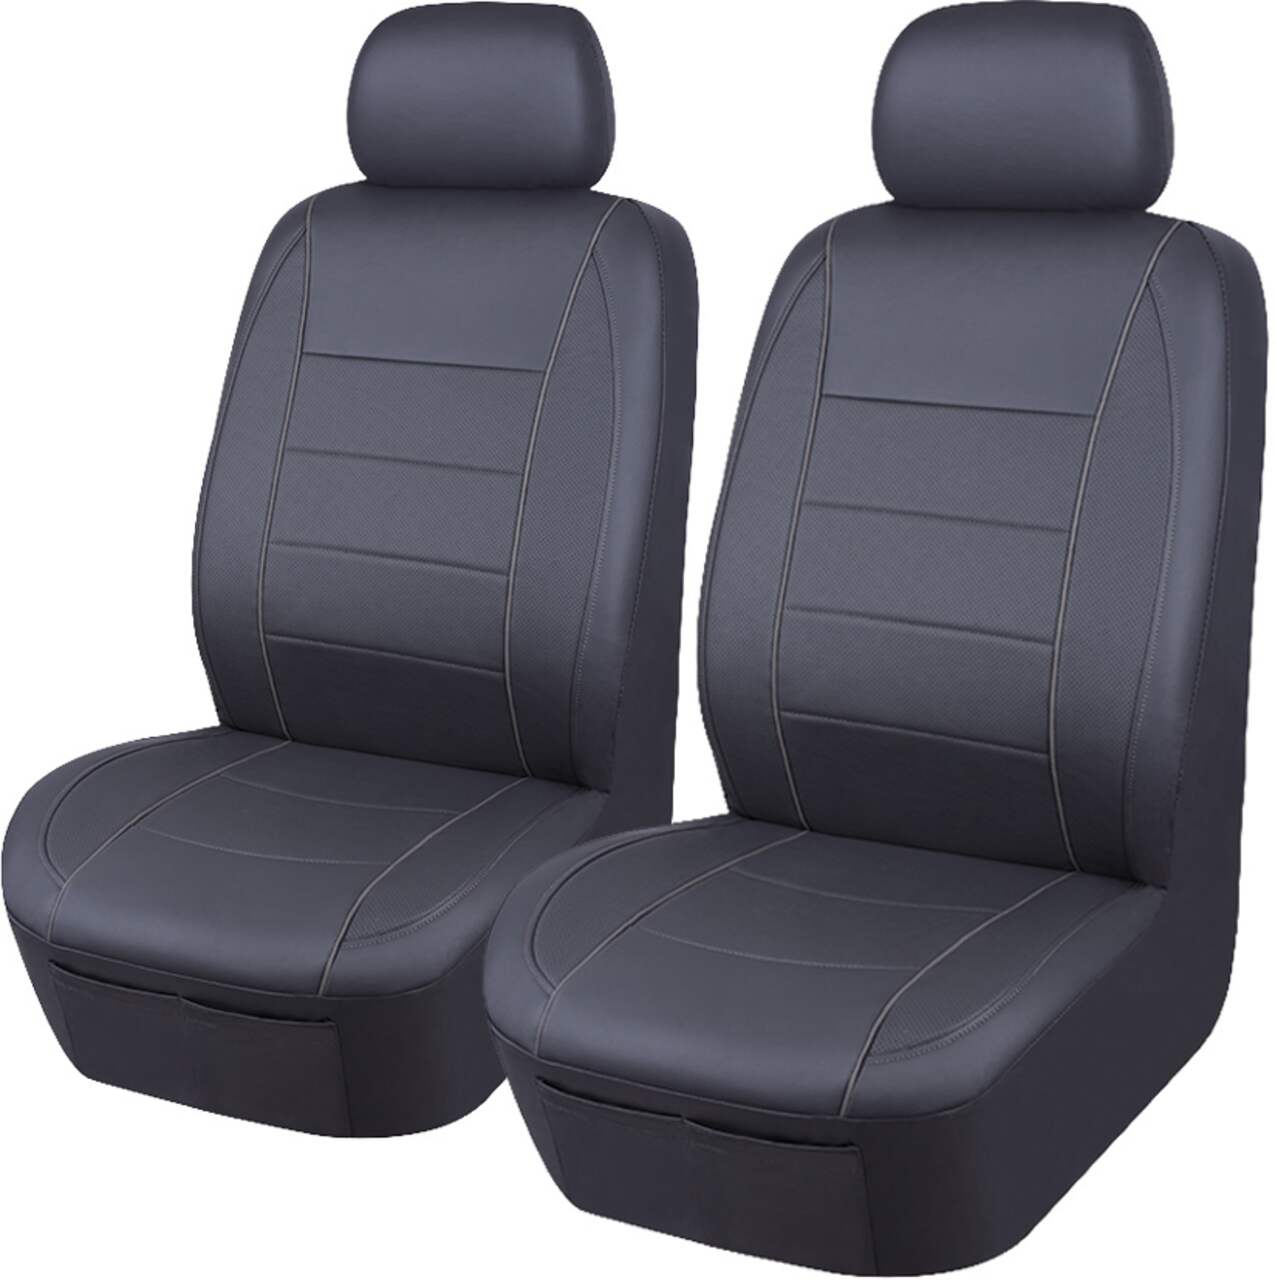 Synthetic Leather Seat Cover, 2-pack